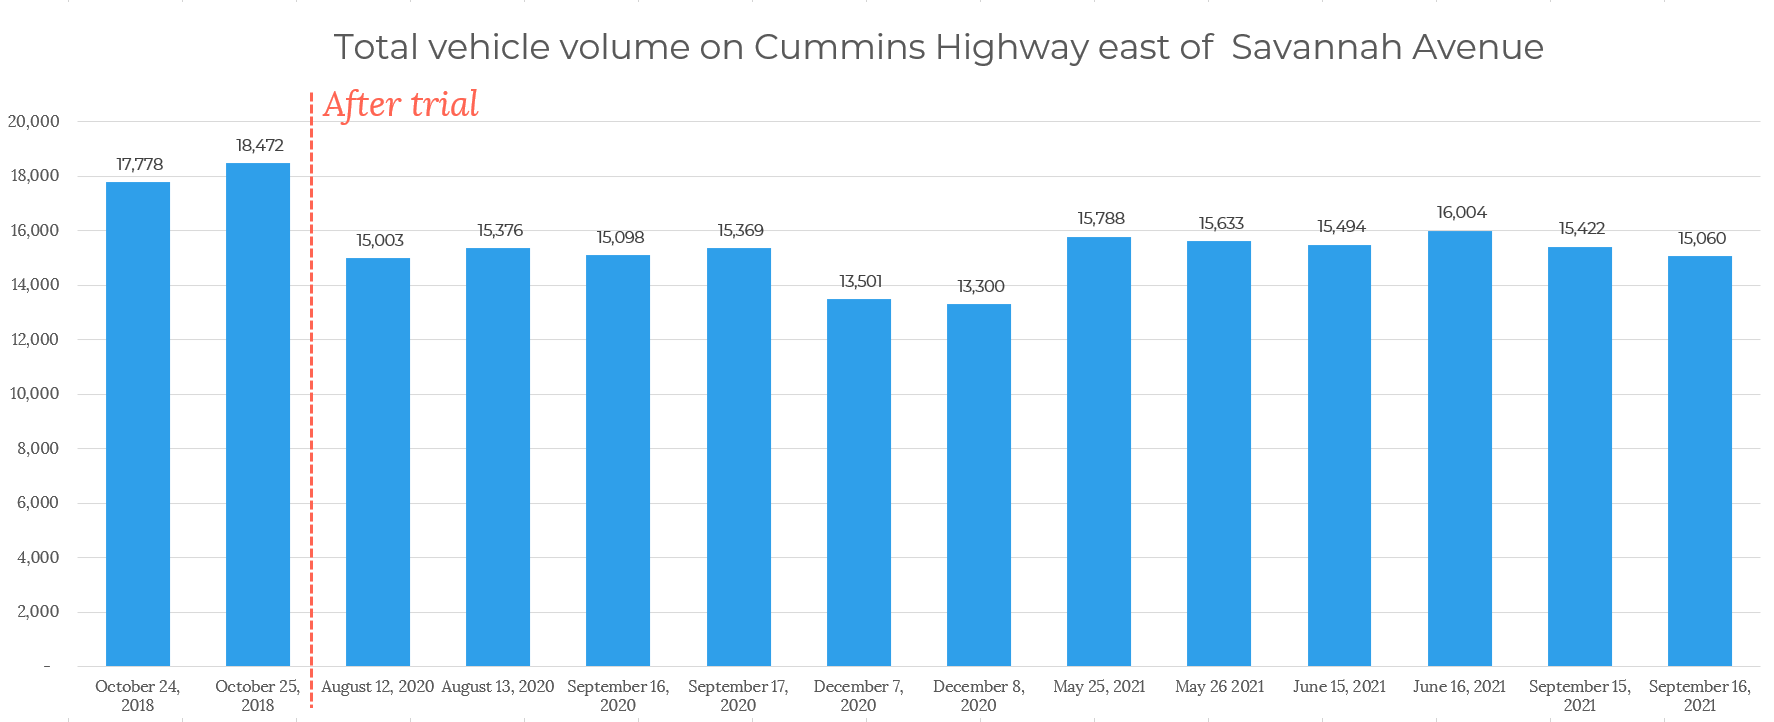 A bar chart shows traffic volumes on Cummins Highway east of Savannah. Data were collected on two consecutive days in October 2018, August 2020, September 2020, December 2020, May 2021, June 2021, and September 2021. In October 2018, the daily volume of vehicles was 17778 and 18472. Over the following collection periods, it was usually between 15000 and 16000 each day.